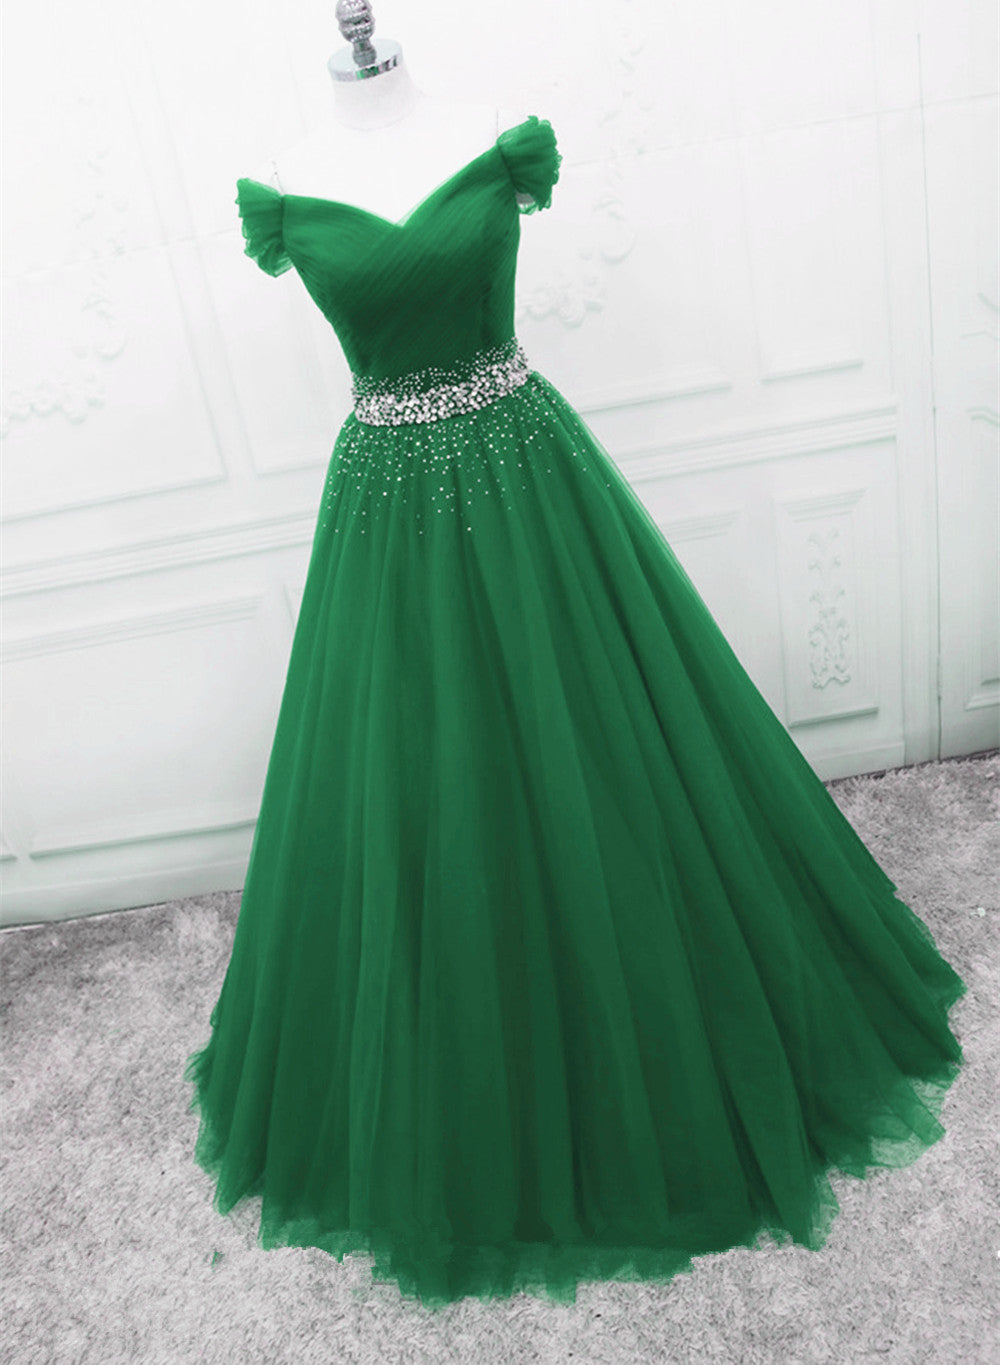 Green Off Shoulder Tulle Beaded A-line Corset Formal Dress, Green Floor Length Long Corset Prom Dress outfits, Formal Dresses For Winter Wedding